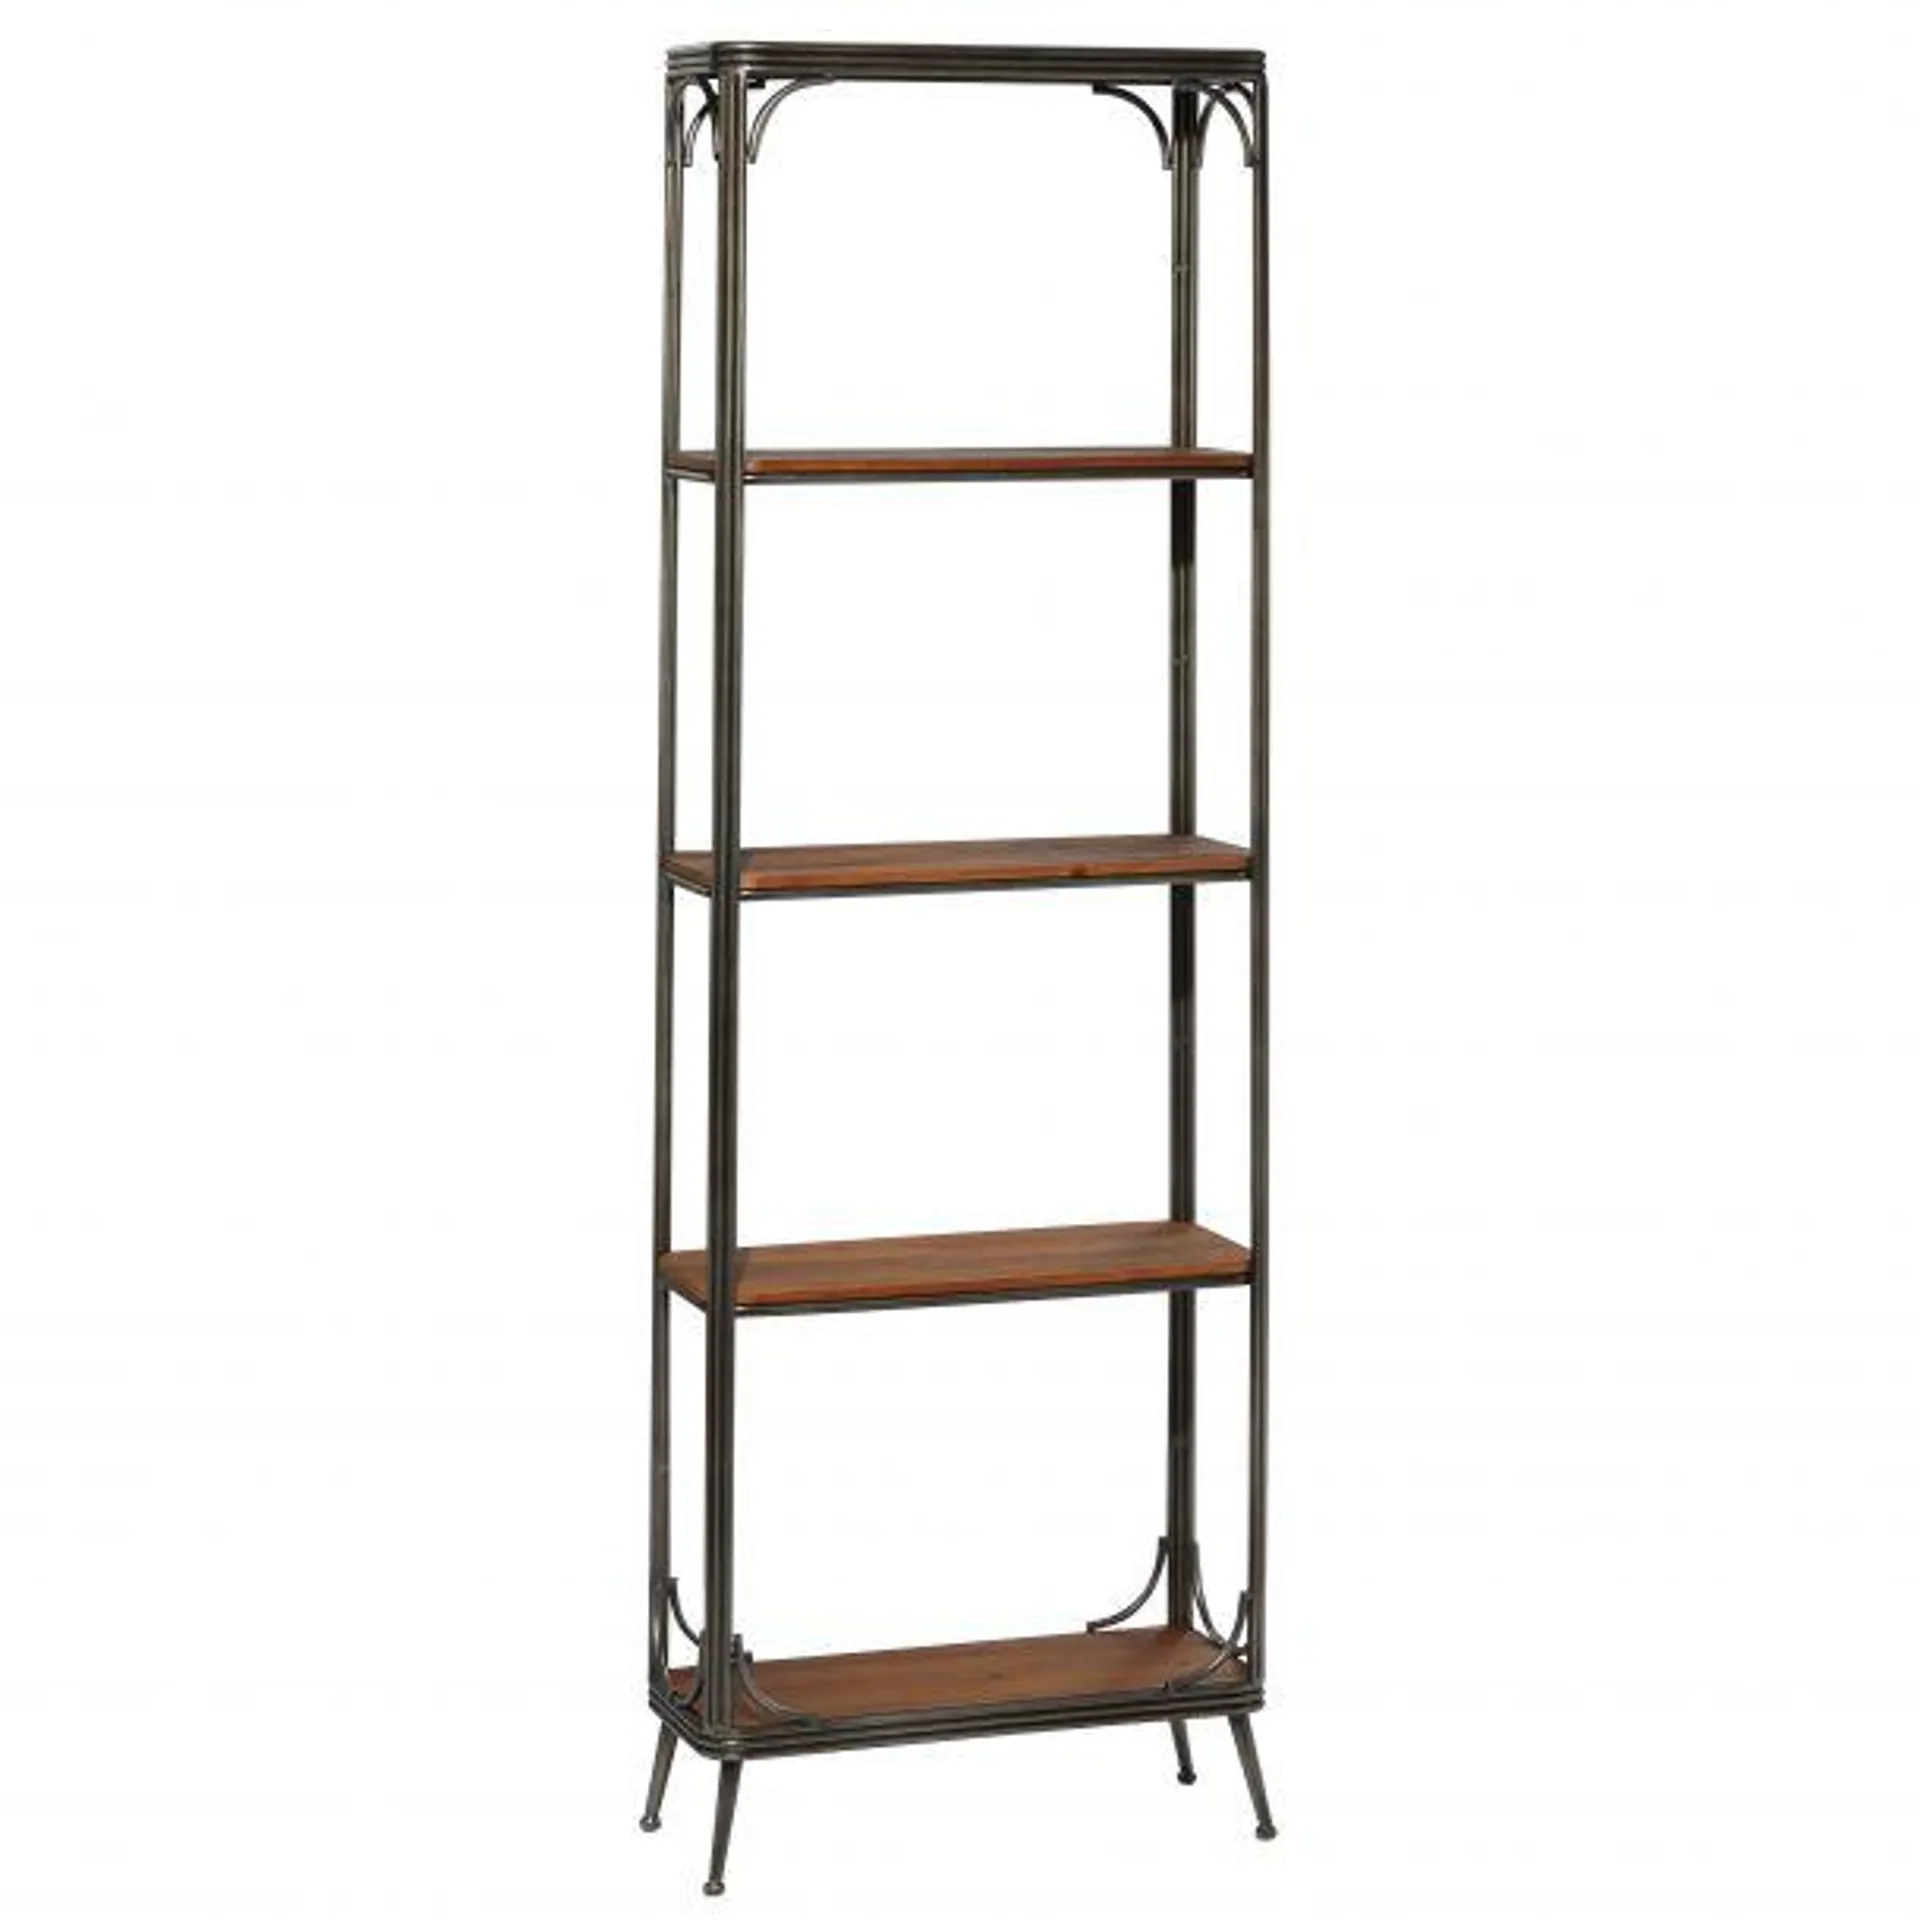 Brown Wood and Metal Industrial Standing Shelves, 71 x 24 x 10